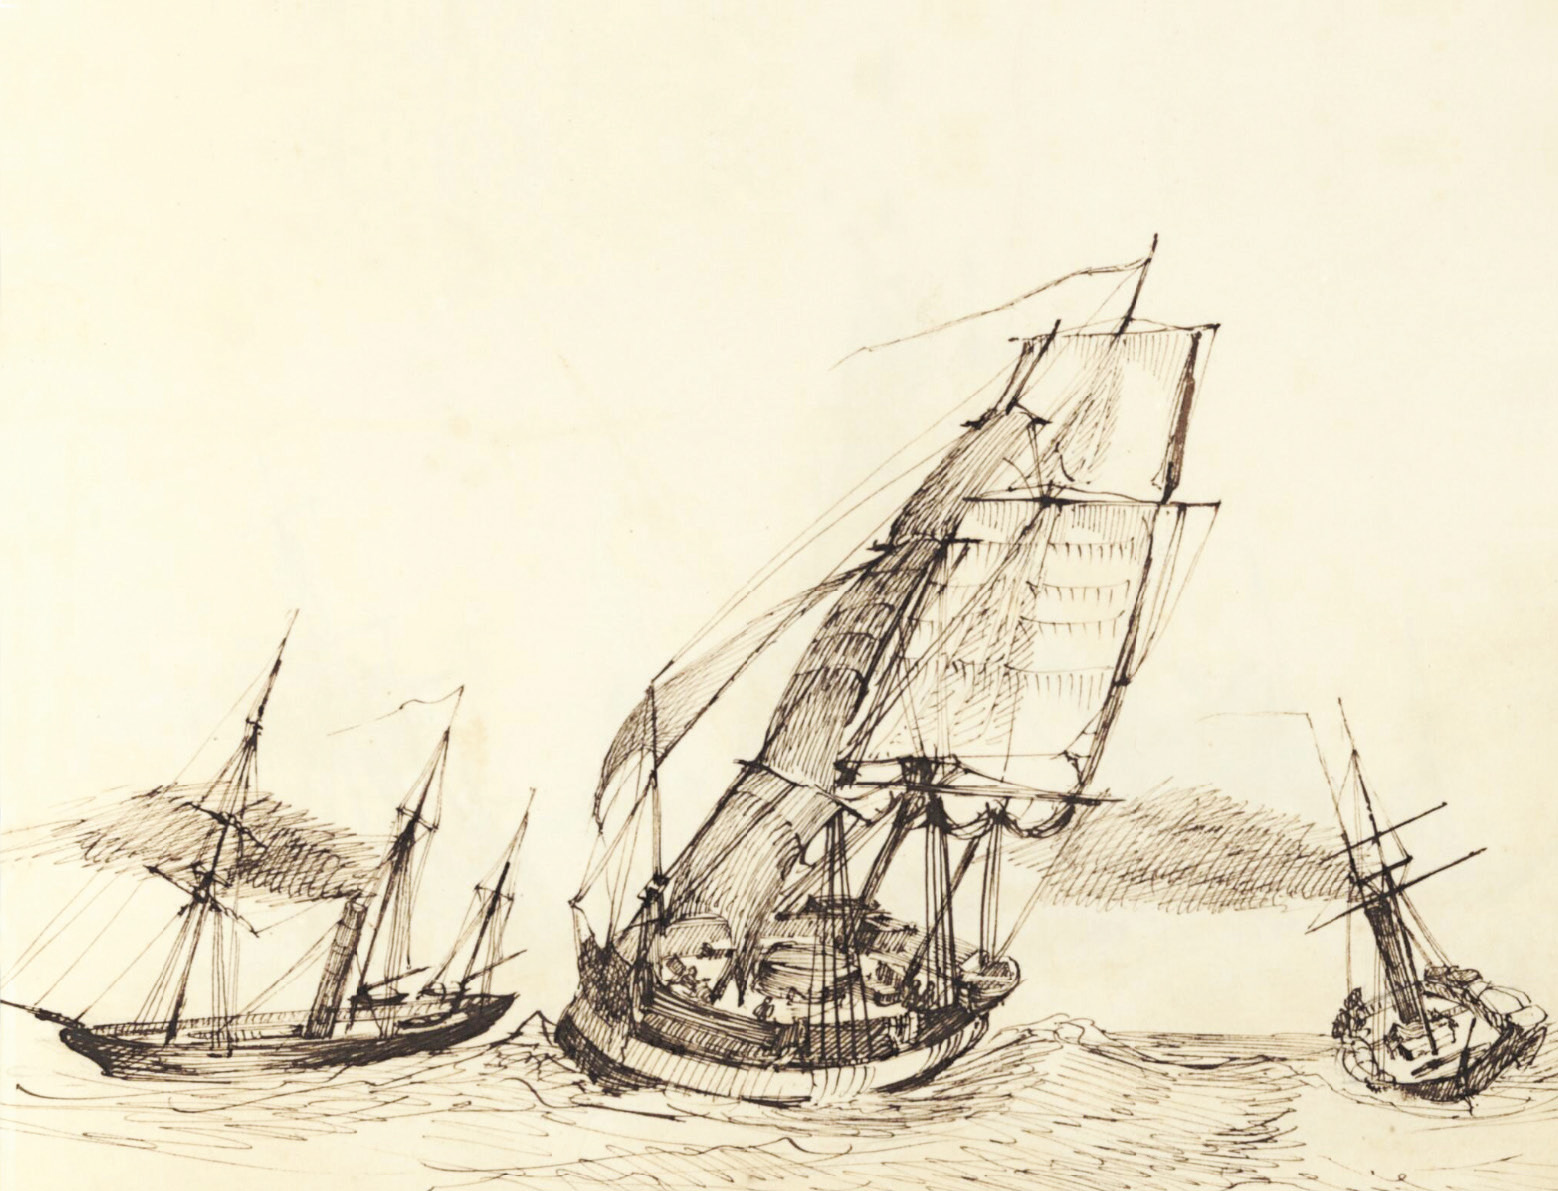 Parting company with Erebus, 4 June 1845’: a sketch by Owen Stanley, an officer on HMS Blazer.